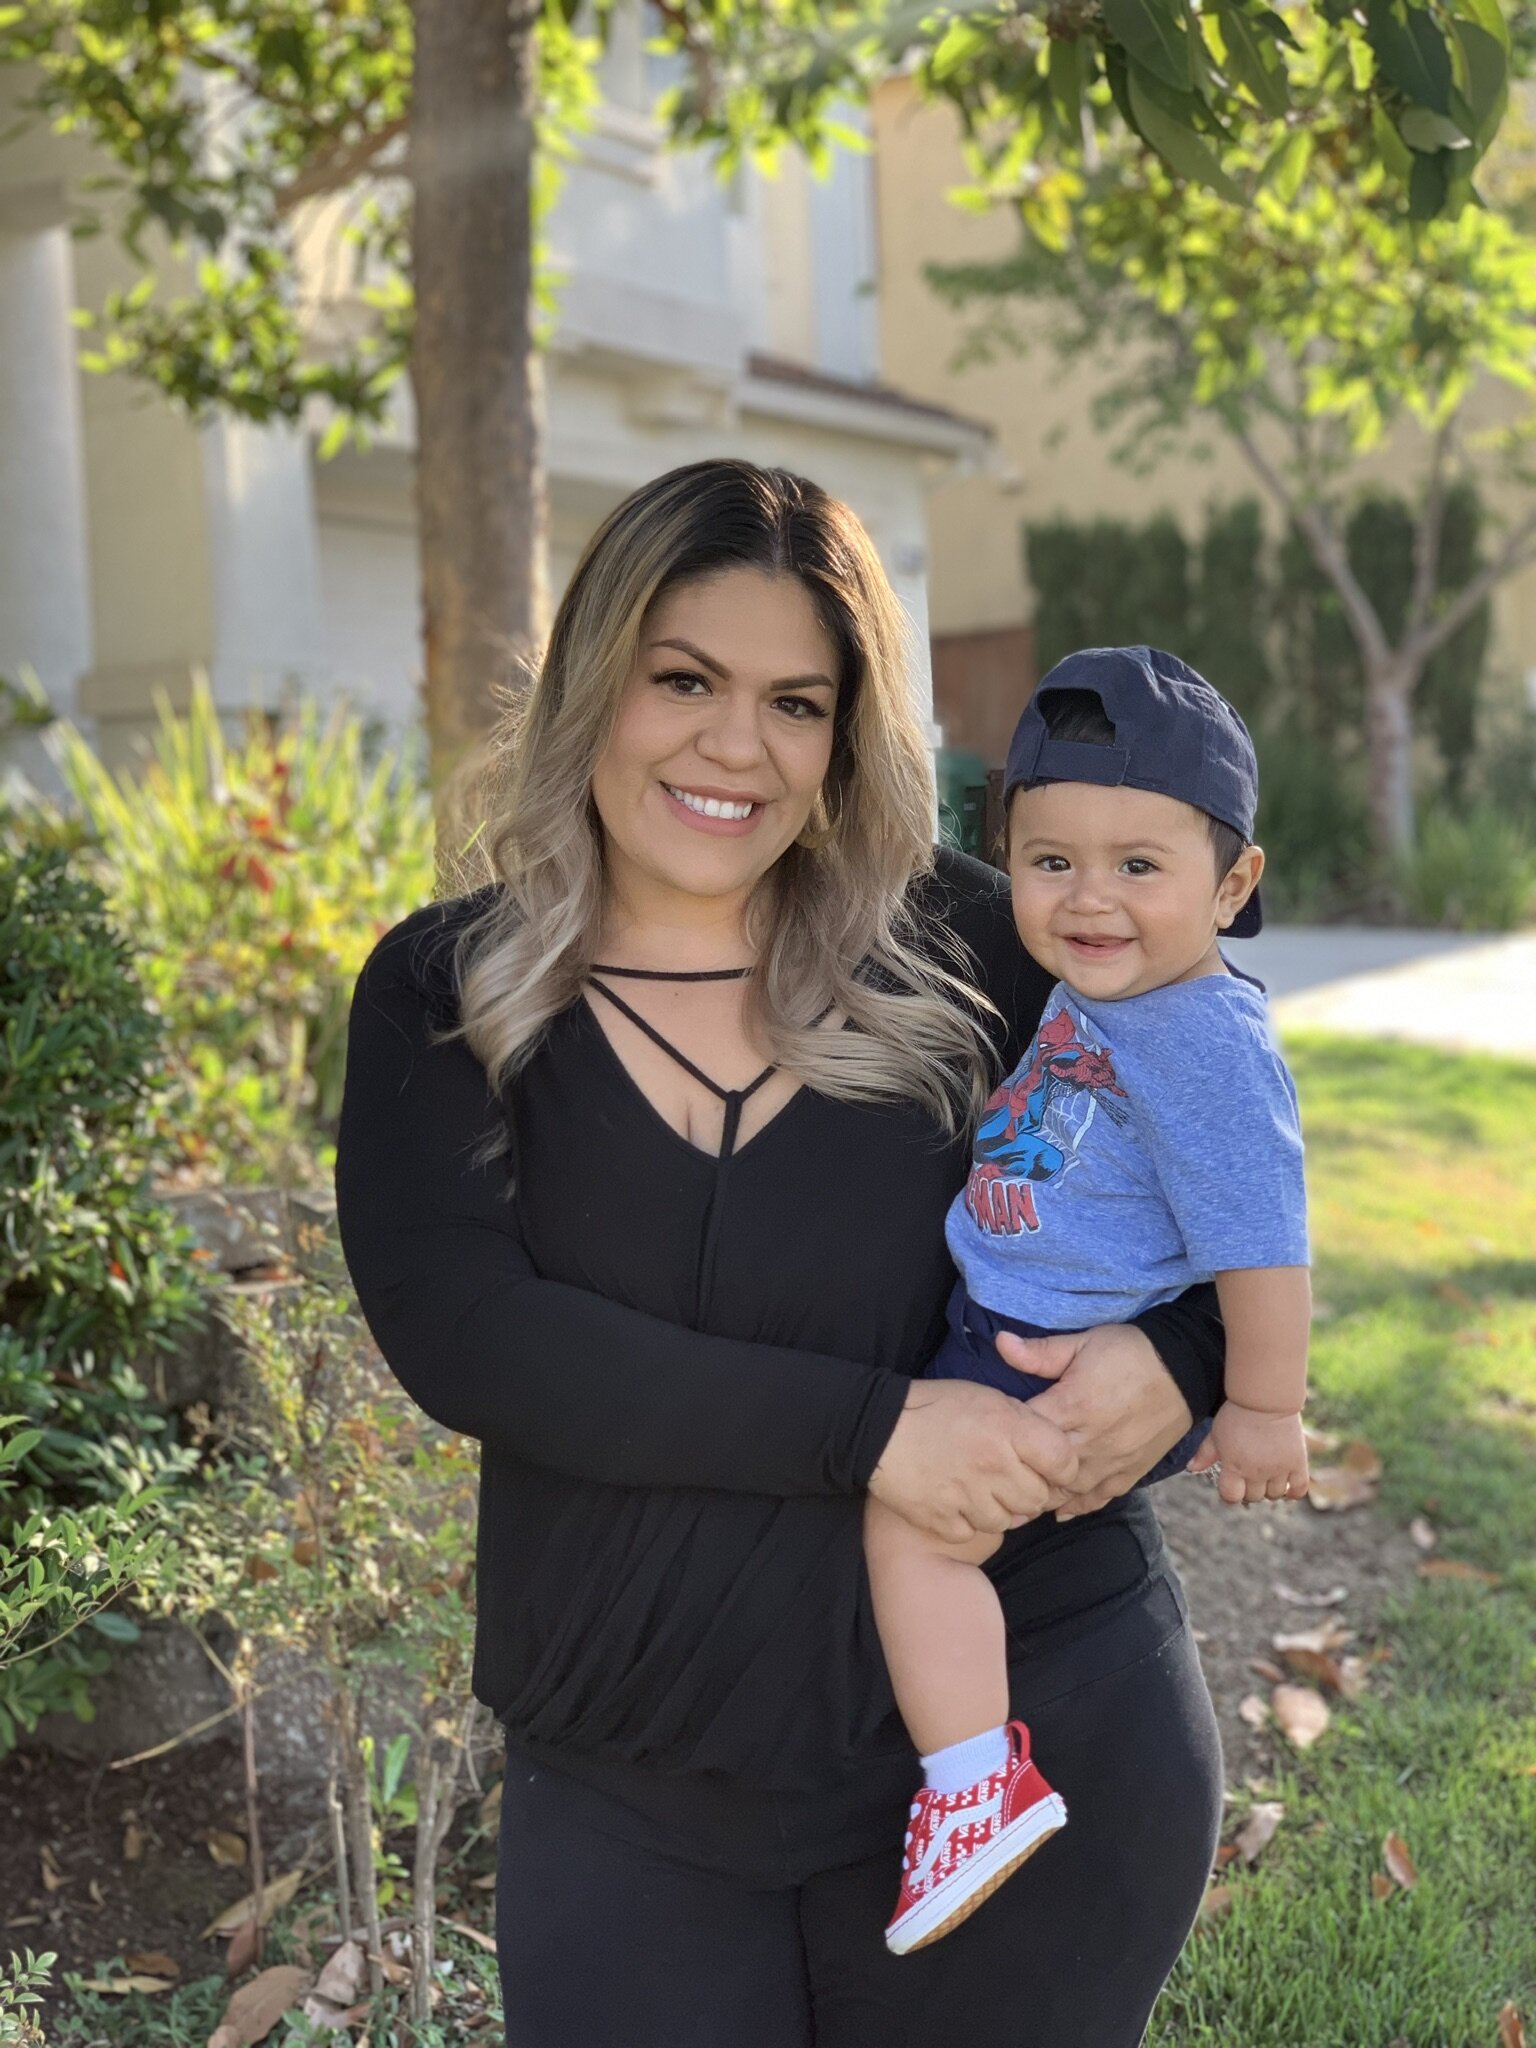 “It is an honor to be able to serve kinship families, children and youth. Their courage, strength and resilience is admirable.” —Anabel Rodriguez